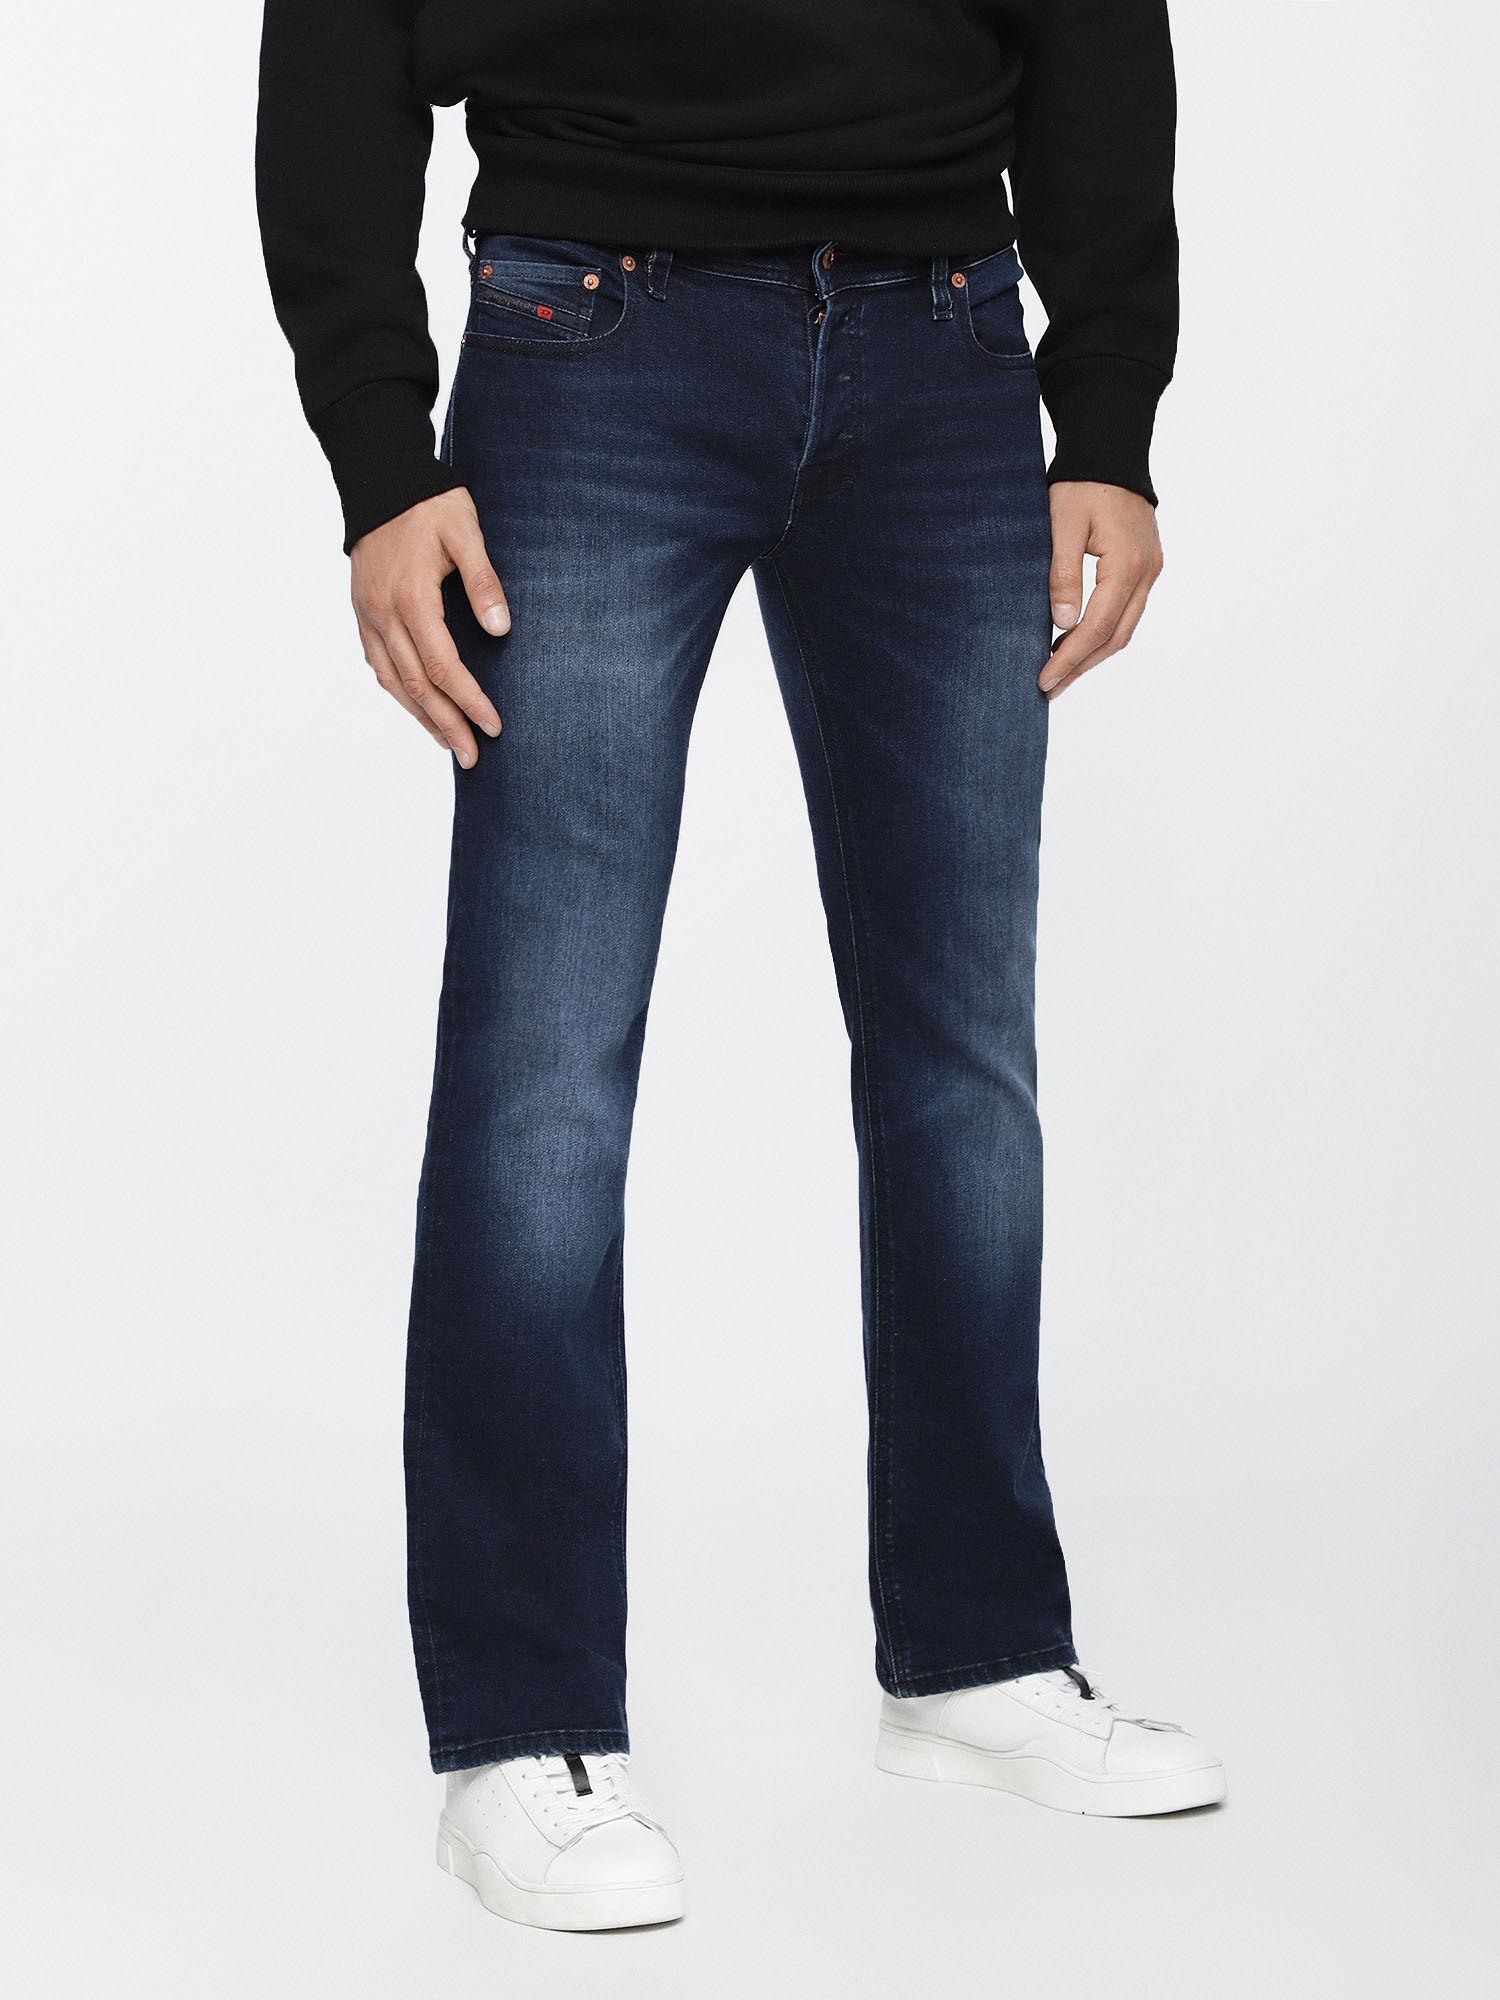 high quality jeans brands